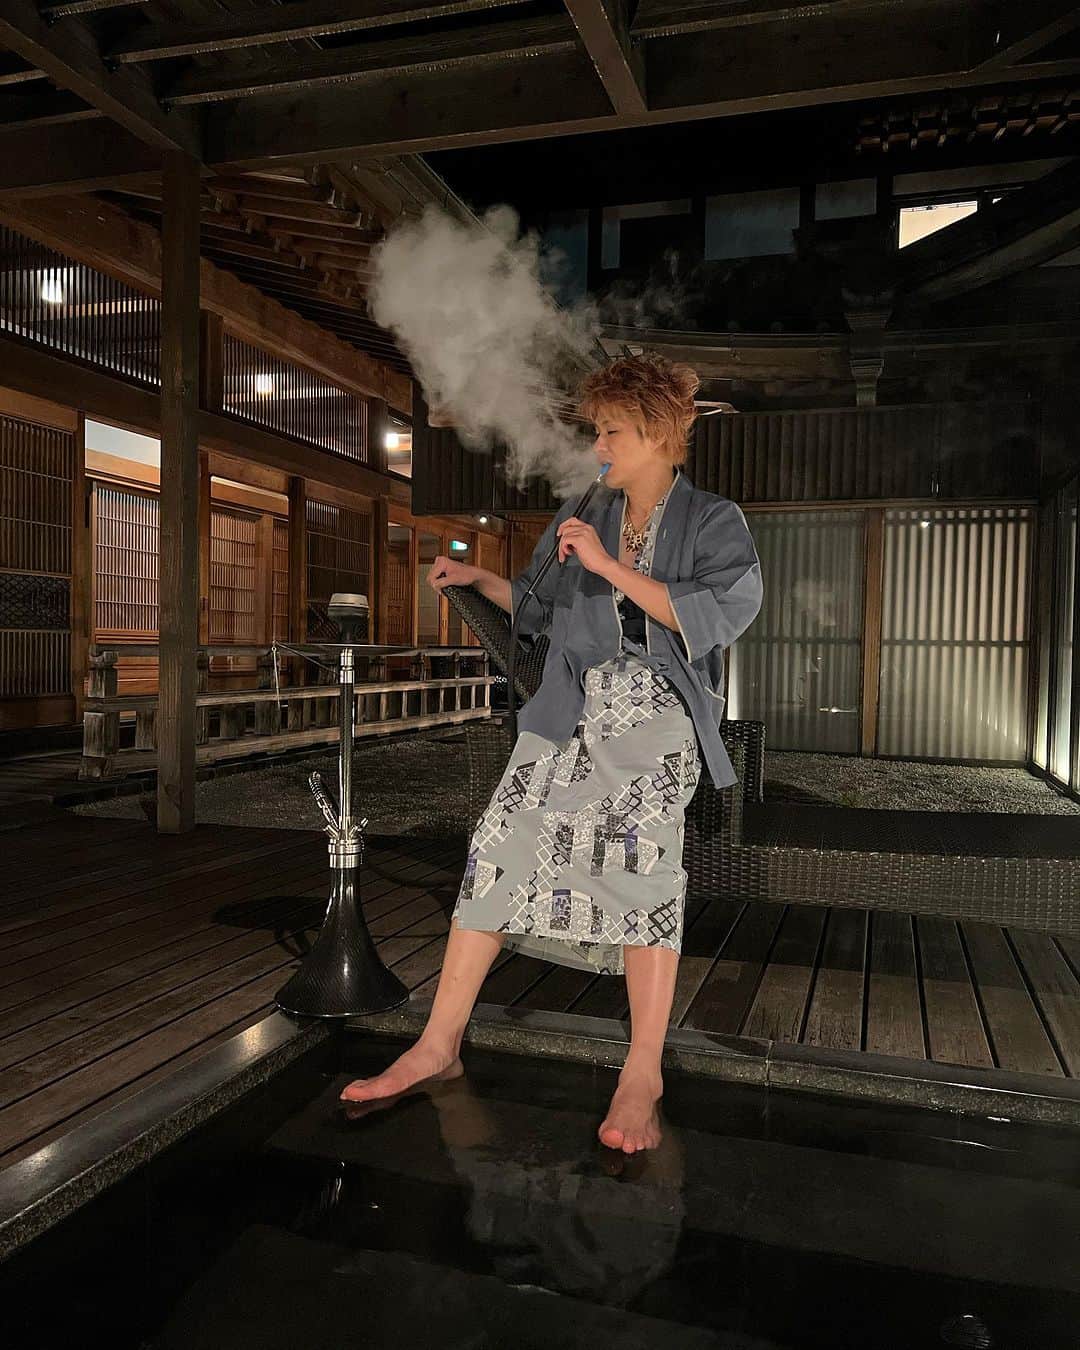 TOMOROのインスタグラム：「I have the best time by soaking in a Japanese hot spring and smoking shisha♨️✨ I'm staying in a 150,000 yen per night suite with a beautiful Japanese woman👸💕 It's a great moment💯❤️✨  日本の温泉に入って、シーシャを吸って最高の時間を過ごす♨️✨俺は、綺麗な日本の女と一緒に一泊１５万円のスイートルームに宿泊してるぜ👸💕極上のひとときだ💯❤️✨  #hookah #shisha #シーシャ #シーシャ王子 #温泉」